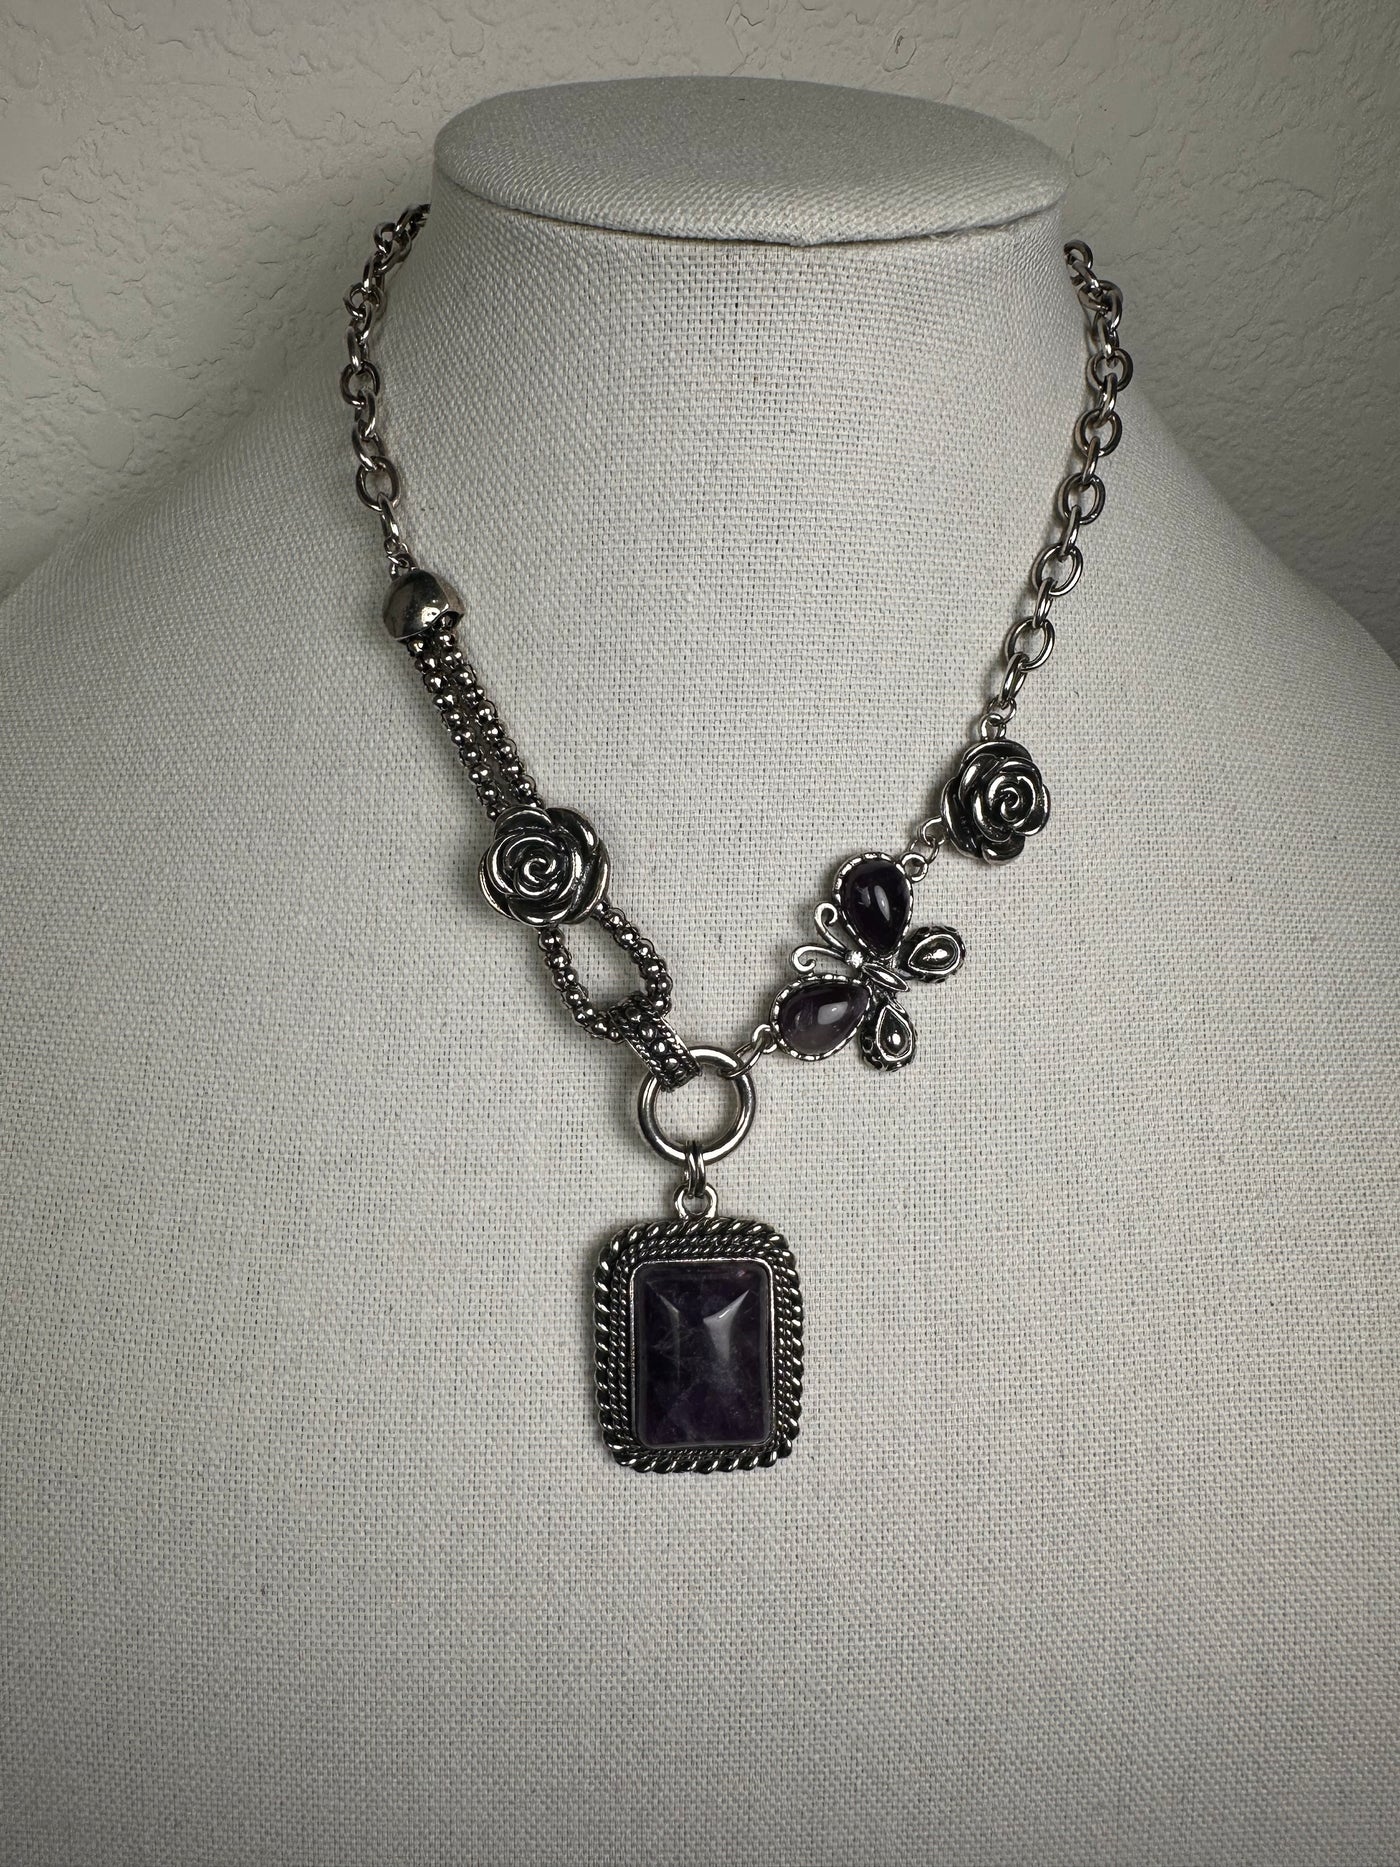 Silver Tone Necklace with a Rectangular Howlite Amethyst Drop